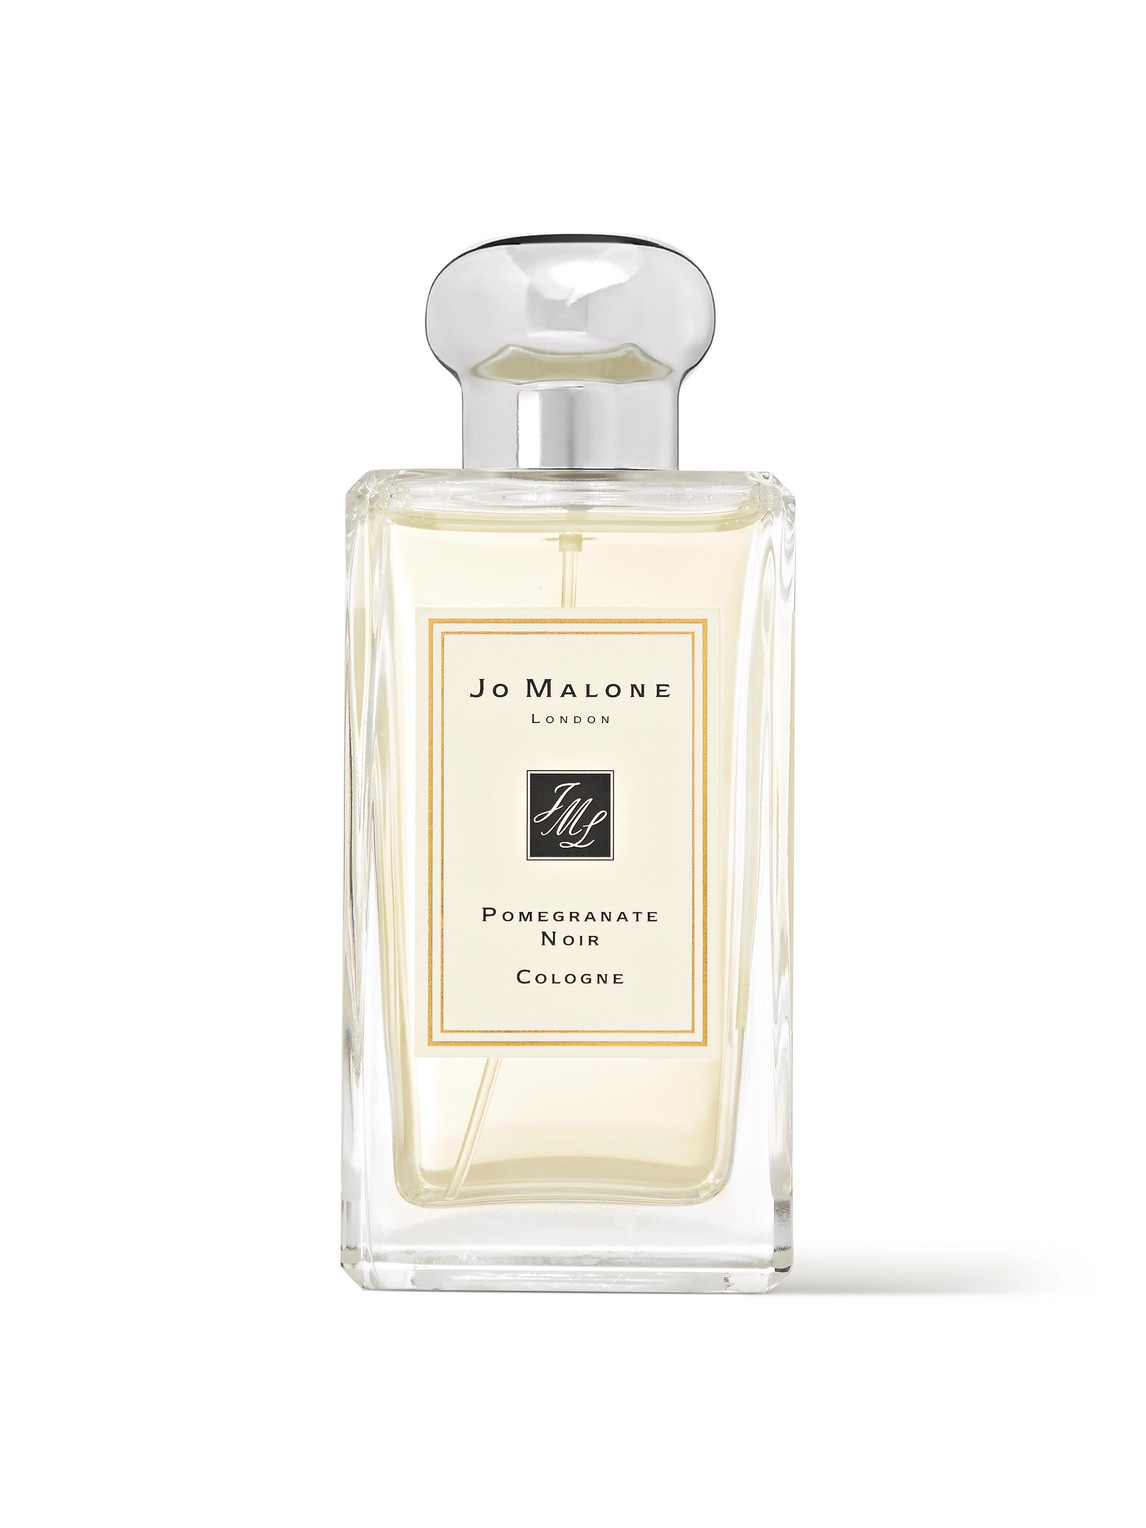 Jo Malone London Pomegranate Noir Cologne, 100ml In Colorless